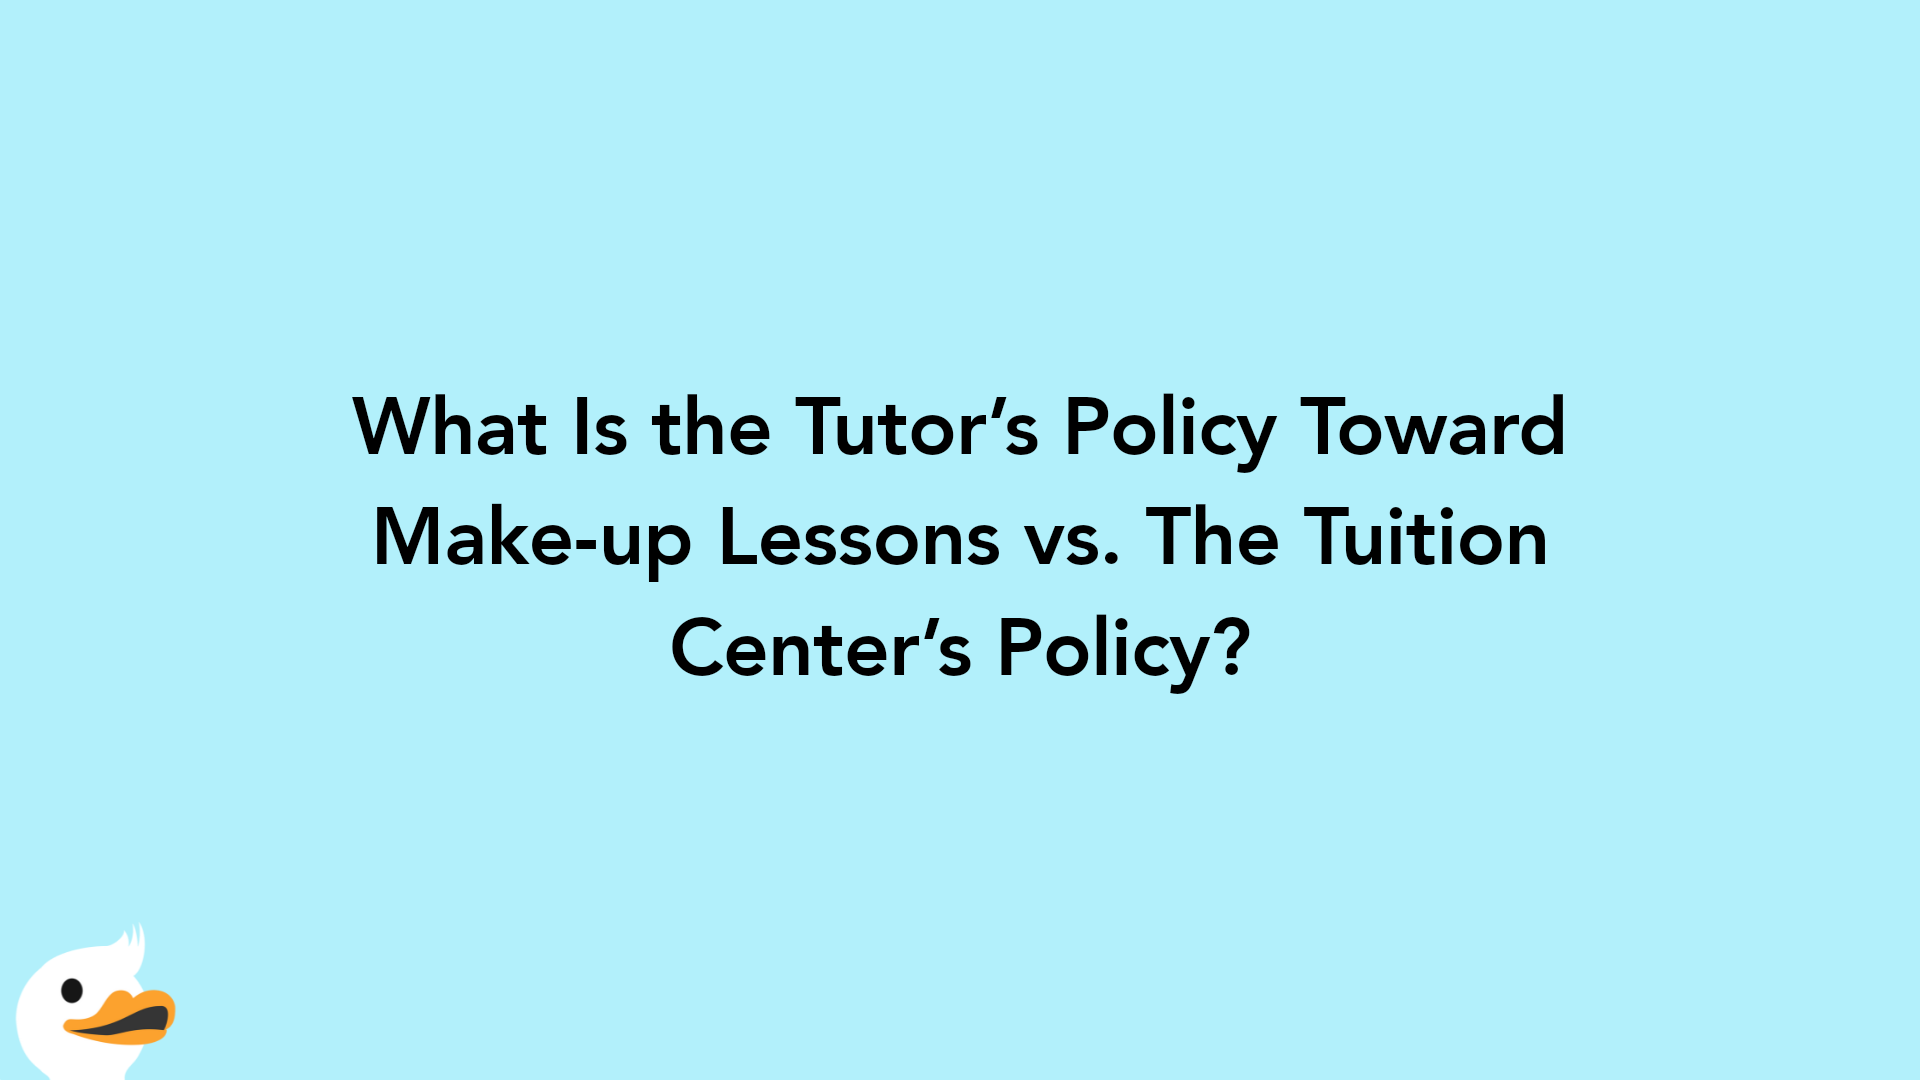 What Is the Tutor’s Policy Toward Make-up Lessons vs. The Tuition Center’s Policy?